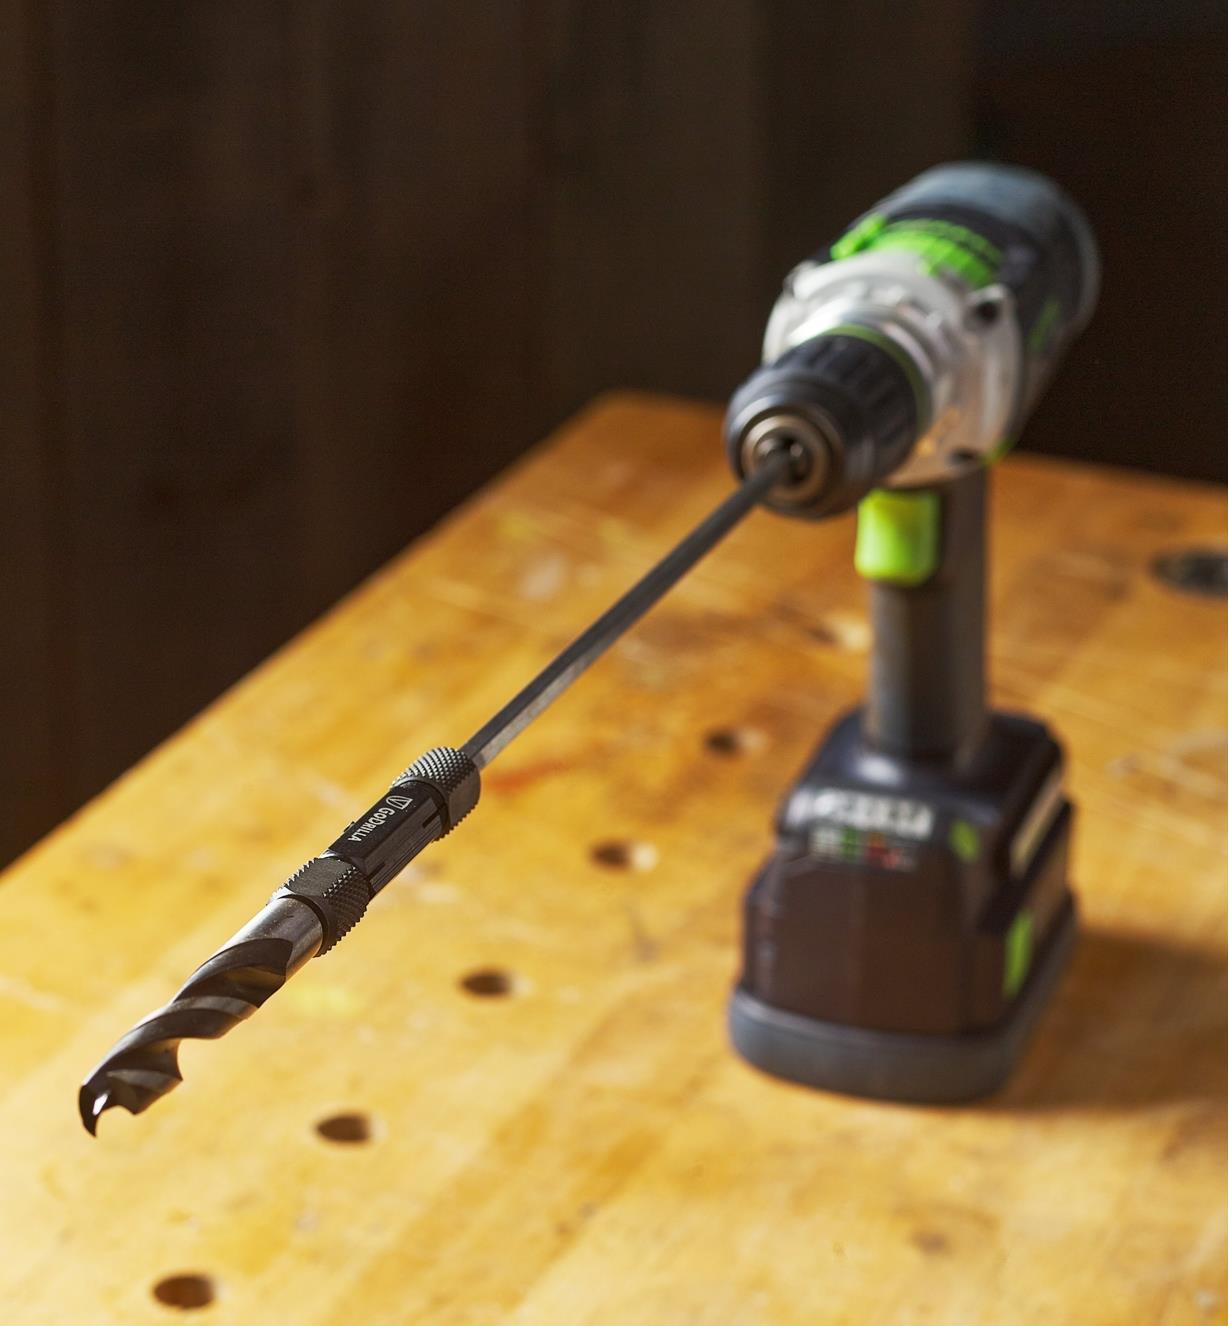 A GoDrilla and drill bit connected to a power drill